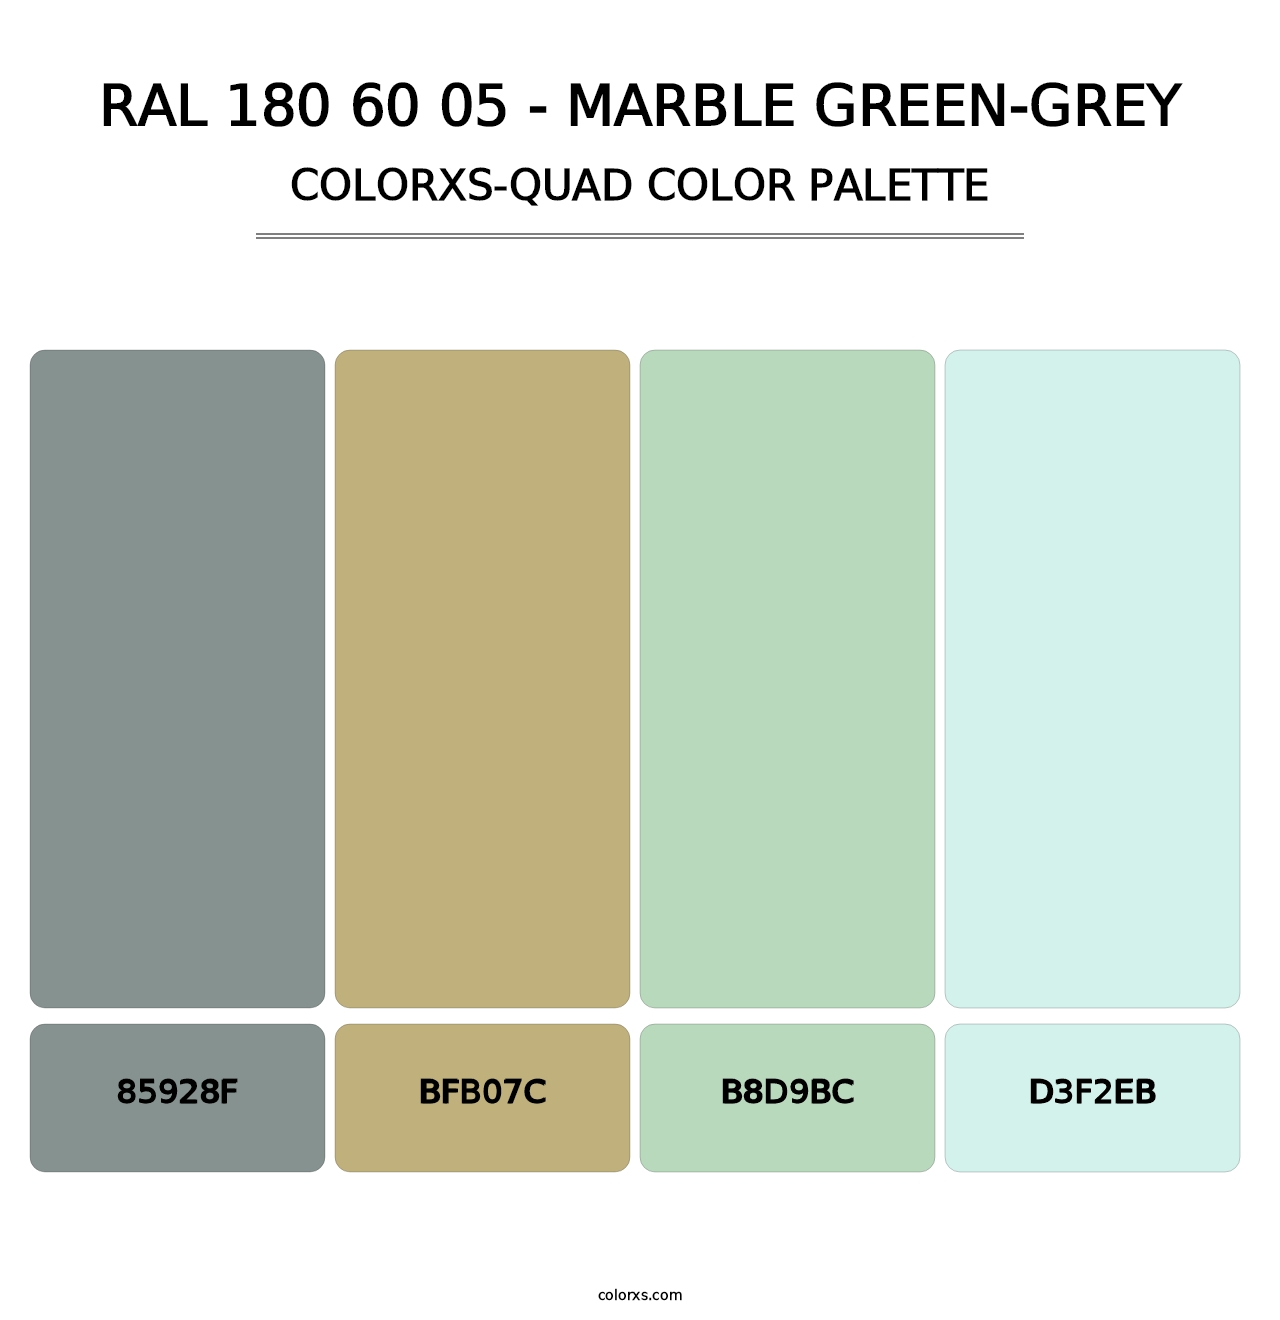 RAL 180 60 05 - Marble Green-Grey - Colorxs Quad Palette